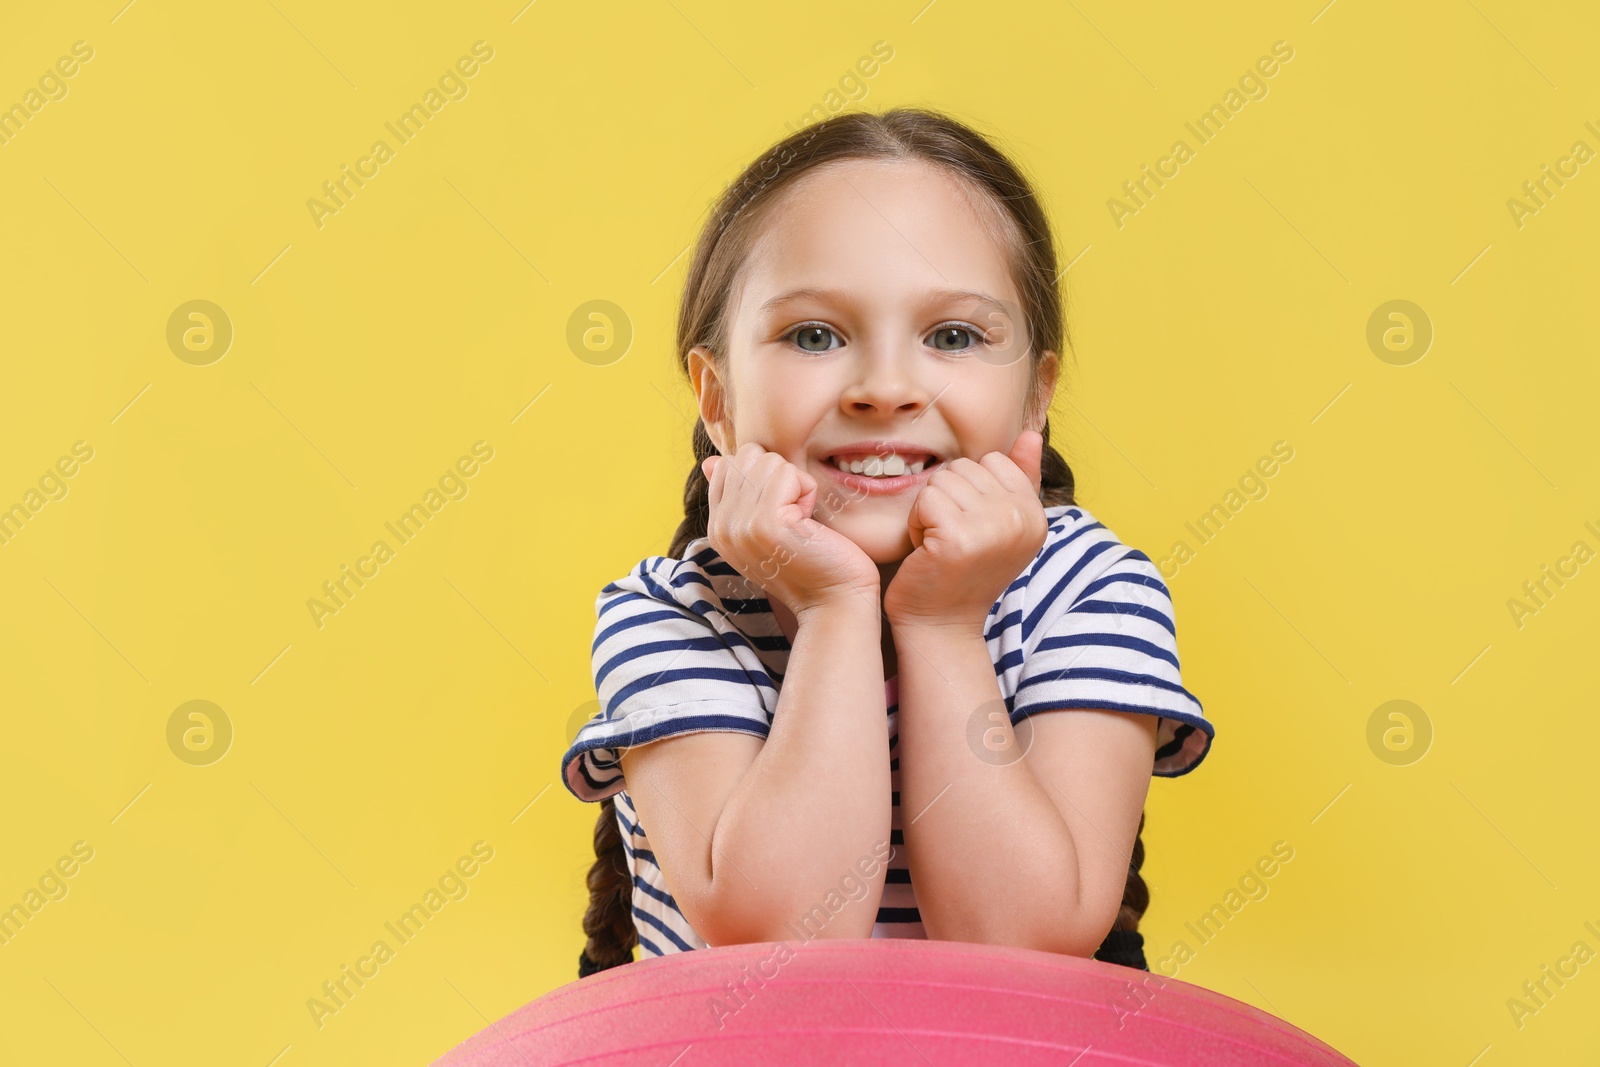 Photo of Cute little girl with fit ball on yellow background